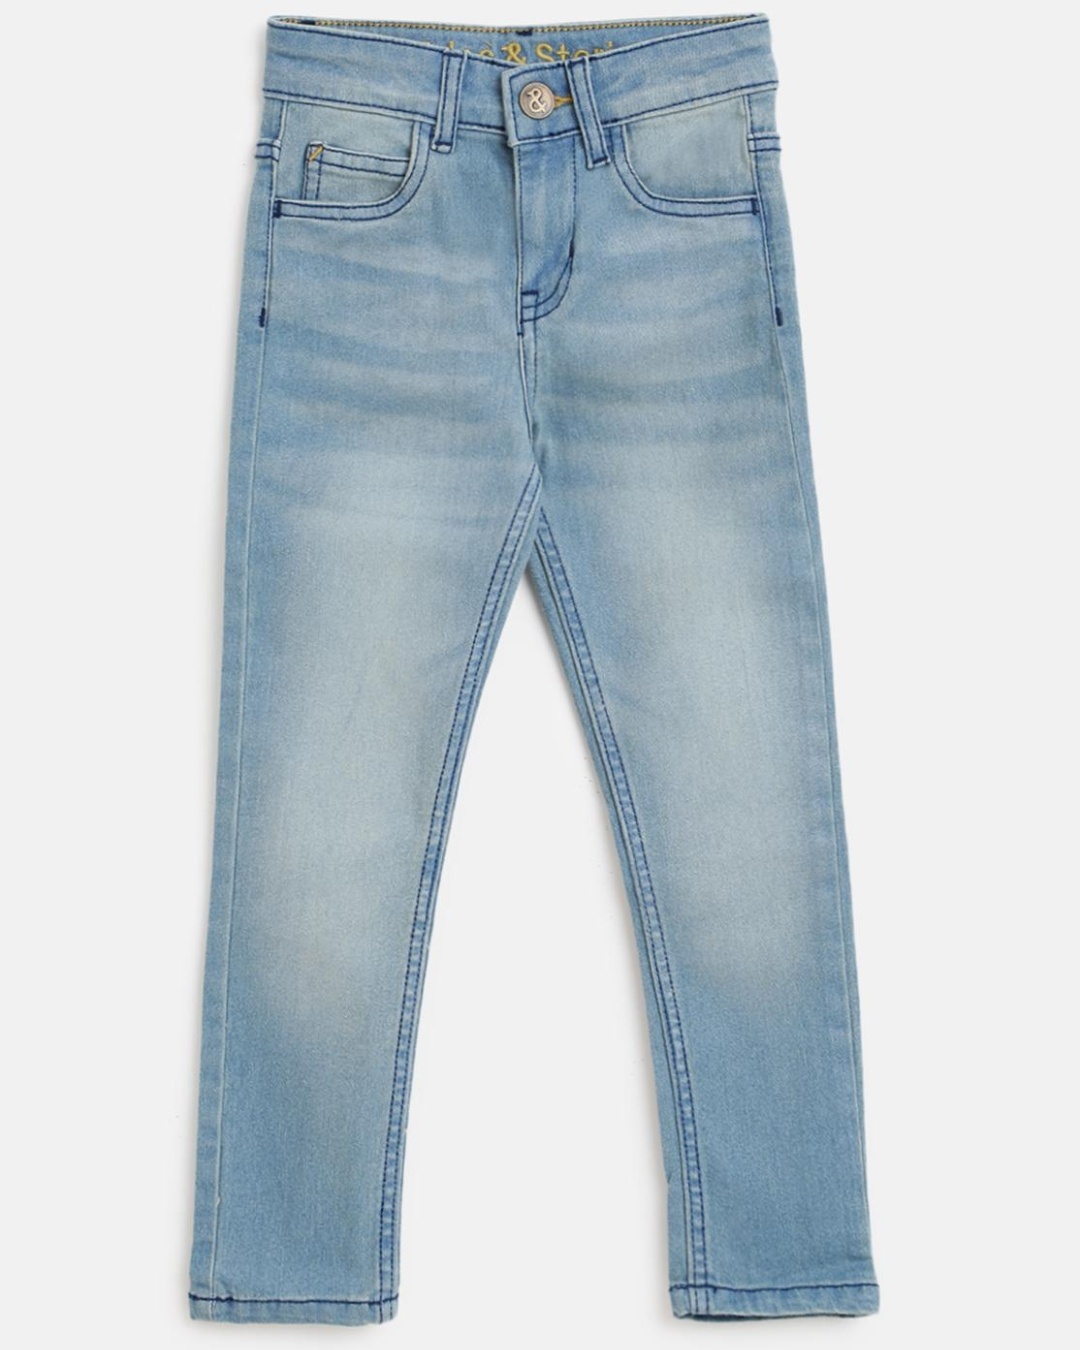 Buy Tales & Stories Boys Blue Washed Slim Fit Jeans Online at Bewakoof